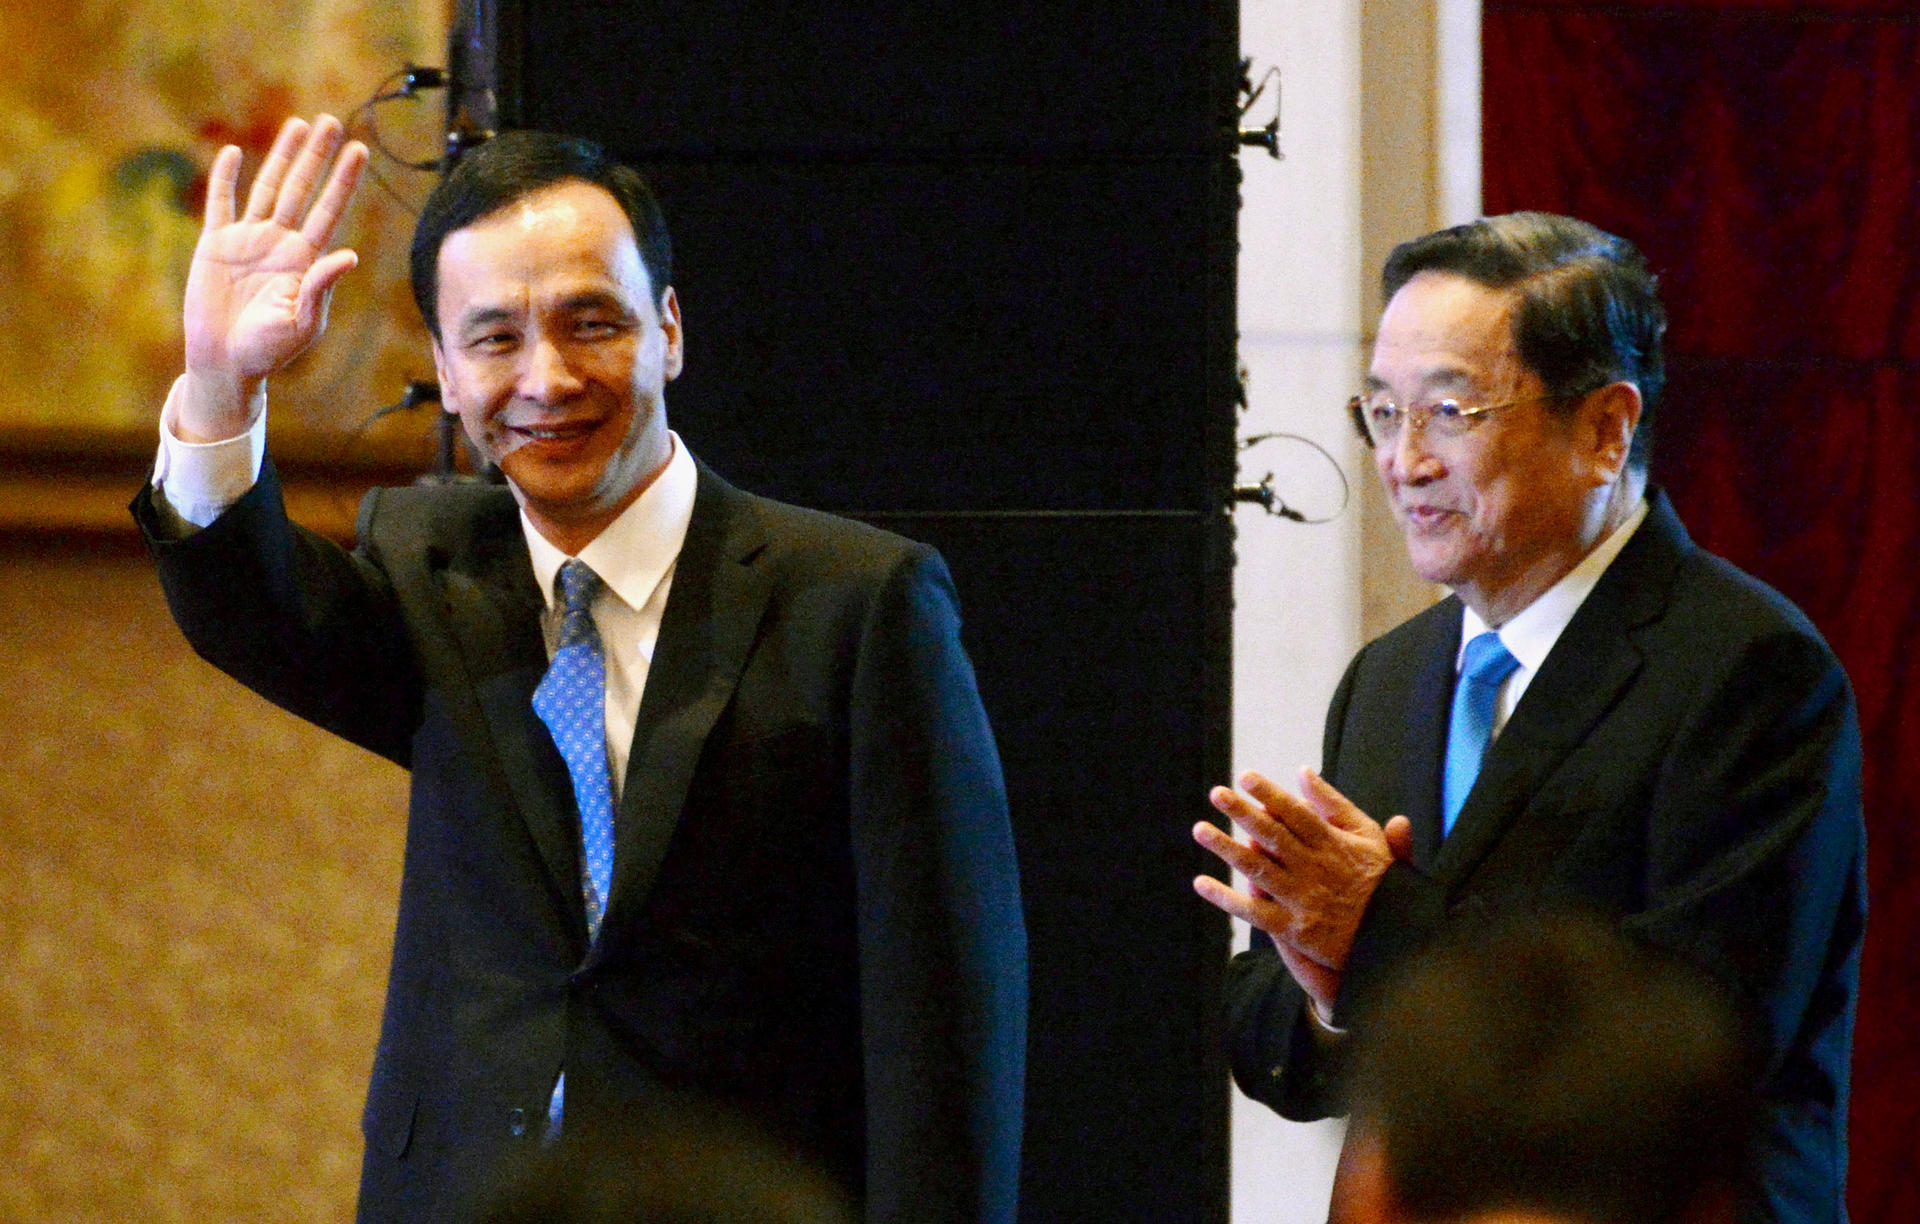 Kuomintang chief Eric Chu (left) and CPPCC chairman Yu Zhengsheng attend the opening ceremony of a cross-strait party forum in Shanghai. Photo: Kyodo